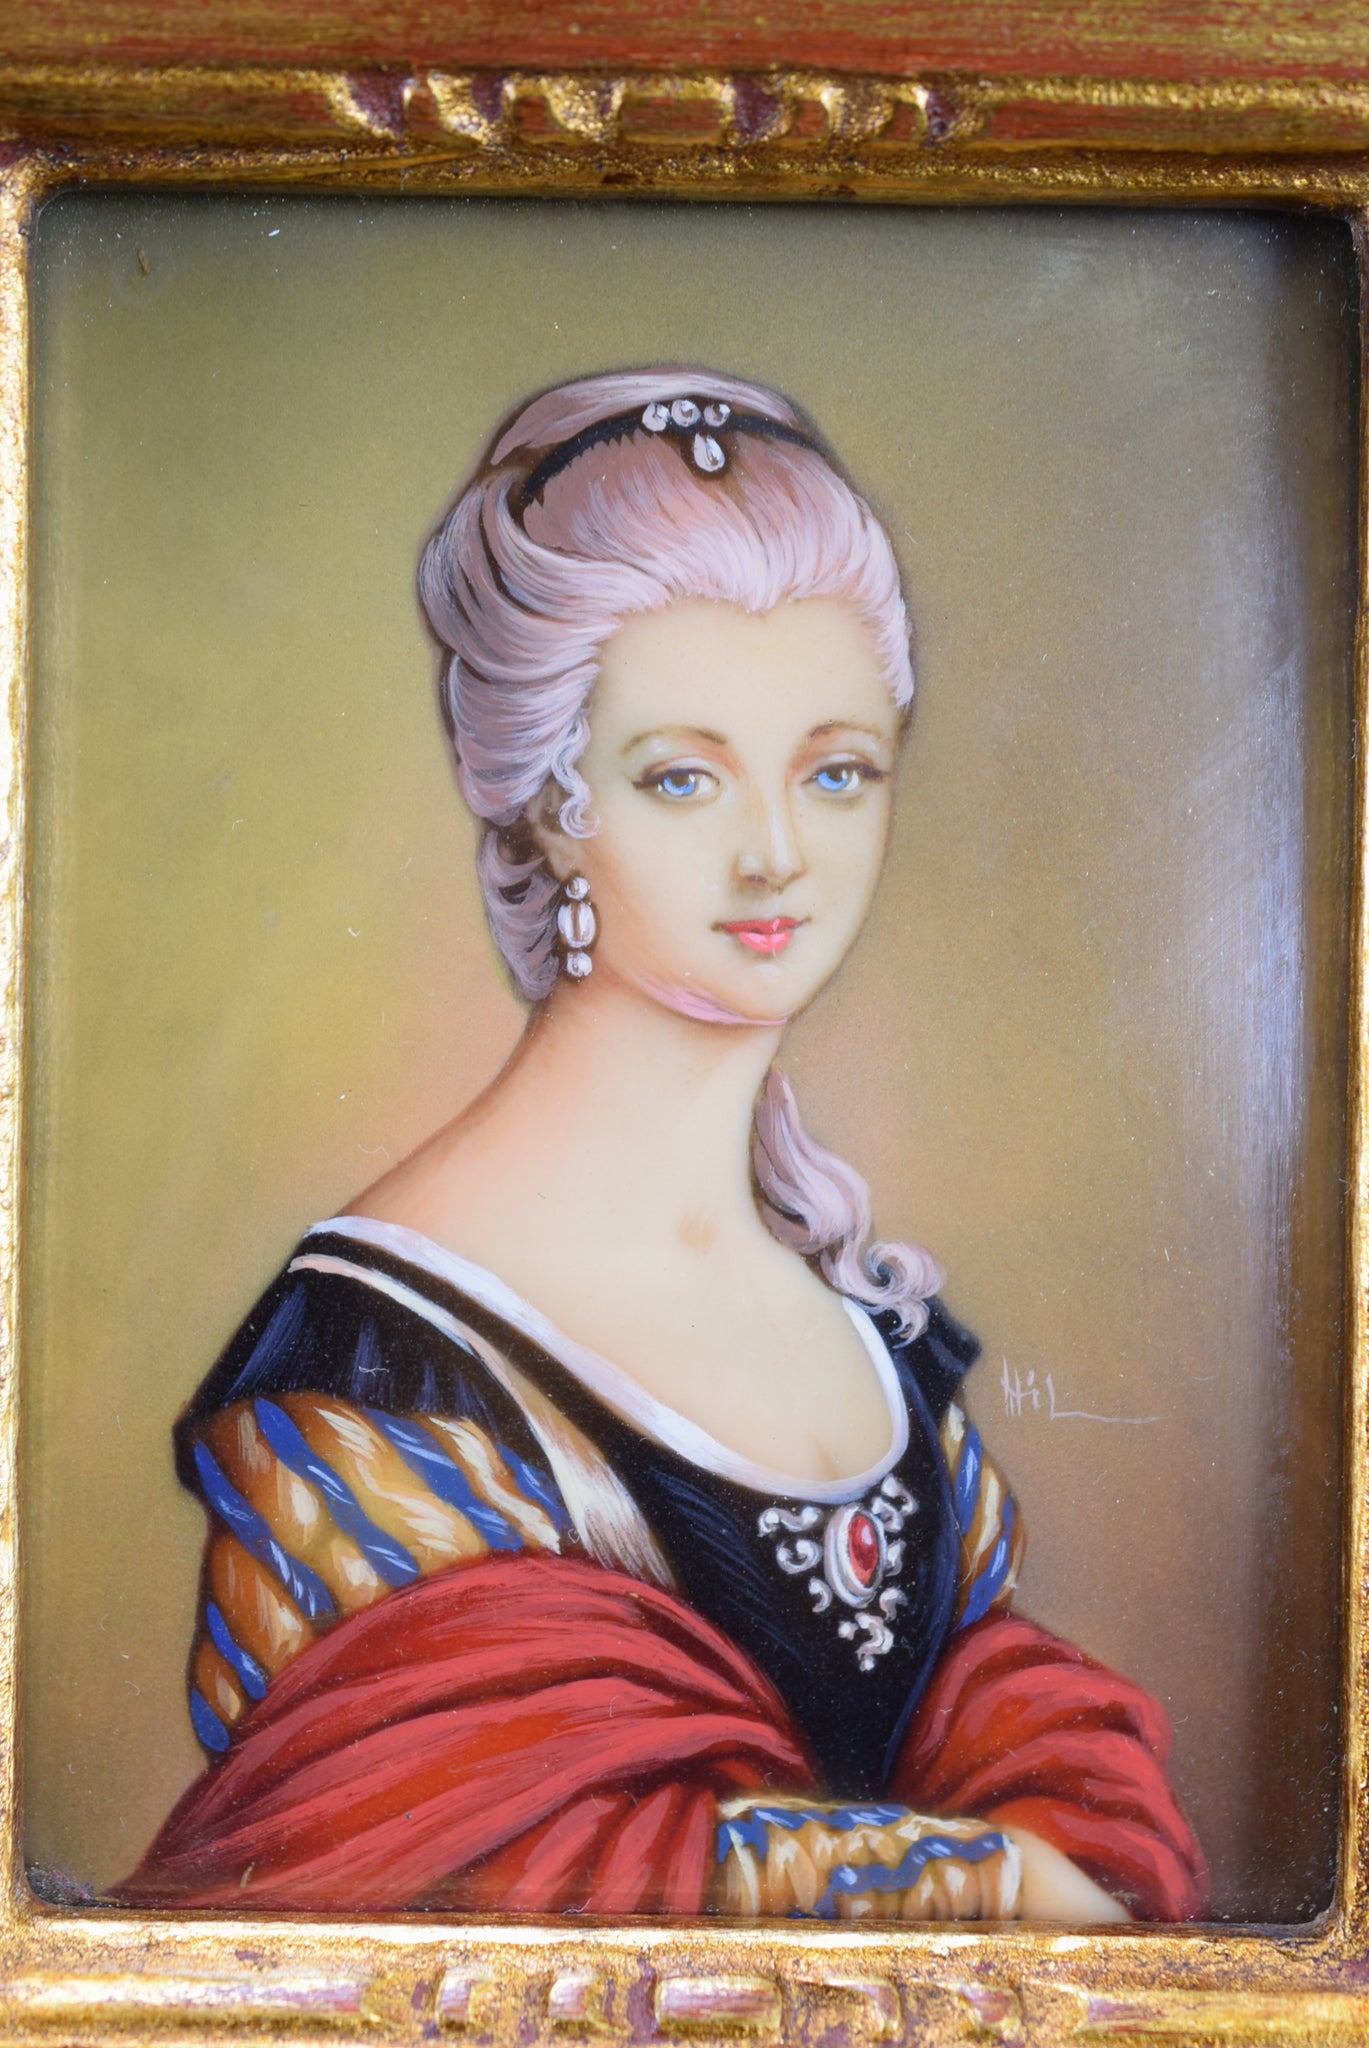 French Antique Miniature Portrait Painting of French Lady Marie Antoinette